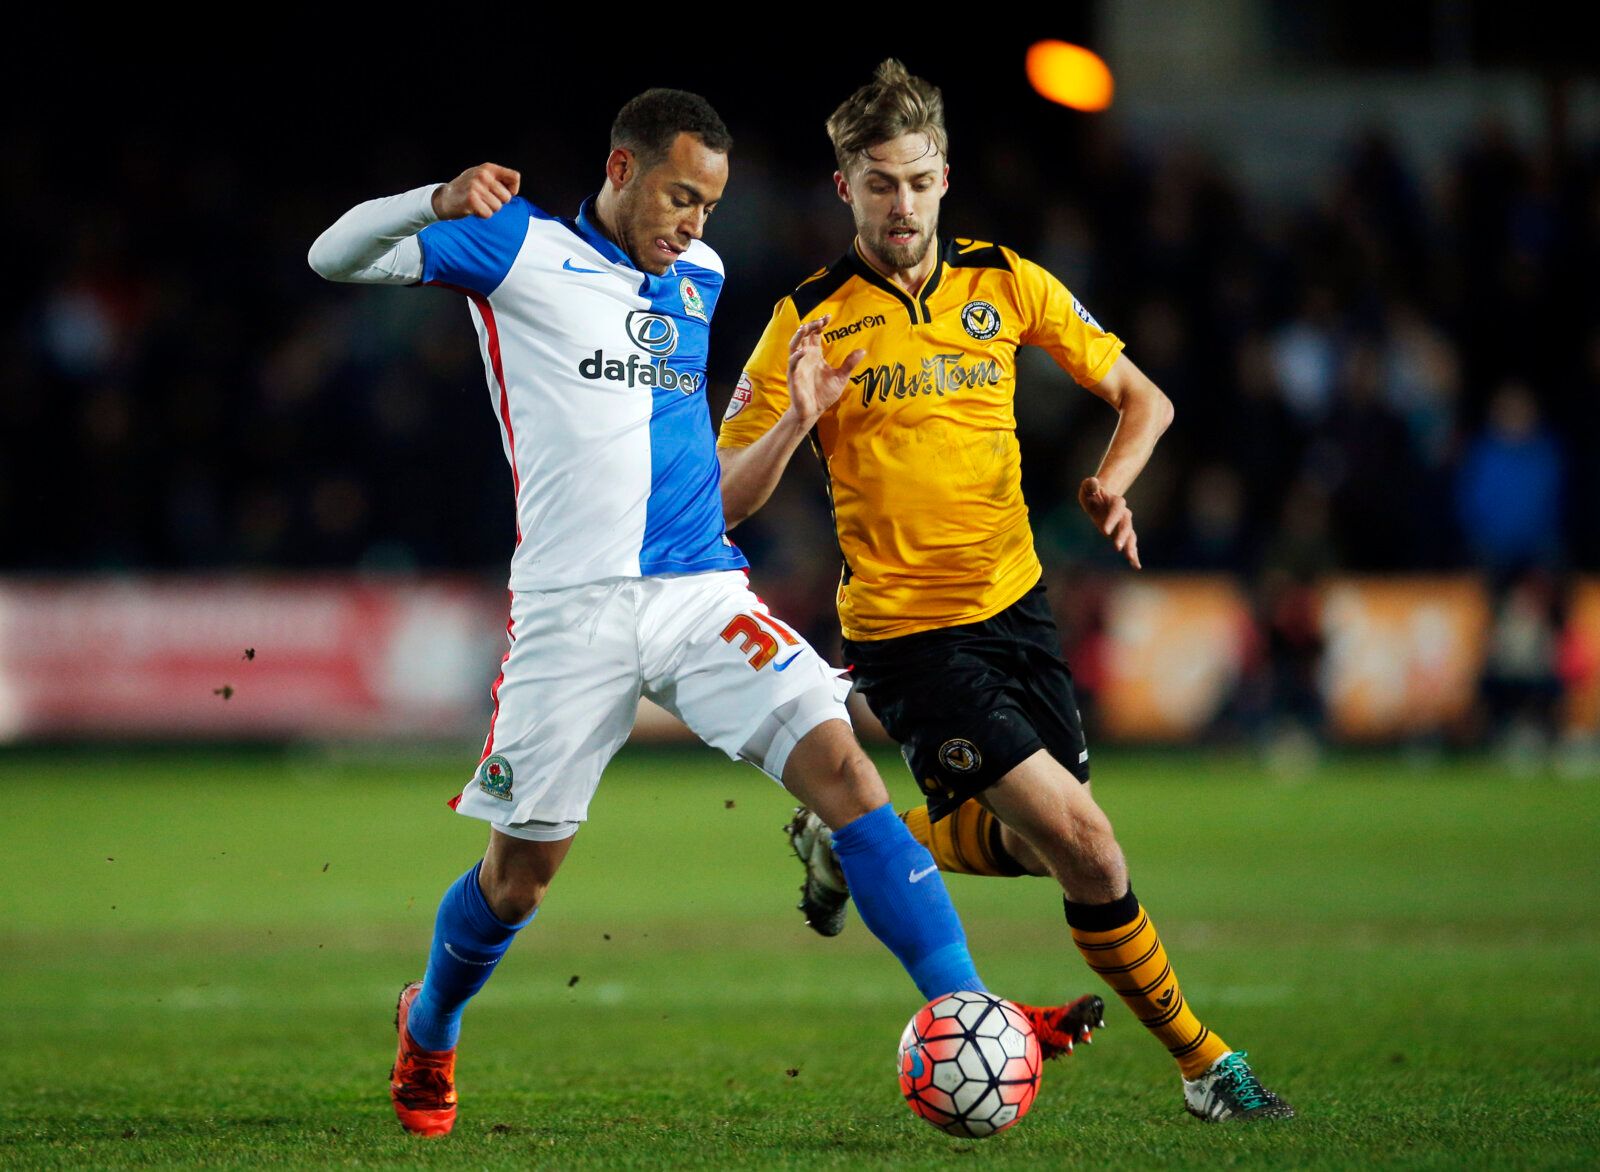 Football Soccer - Newport County v Blackburn Rovers - FA Cup Third Round - Rodney Parade - 18/1/16
Blackburn's Elliott Bennett  in action with Newport's Scott Barrow
Mandatory Credit: Action Images / Andrew Couldridge
Livepic
EDITORIAL USE ONLY. No use with unauthorized audio, video, data, fixture lists, club/league logos or 